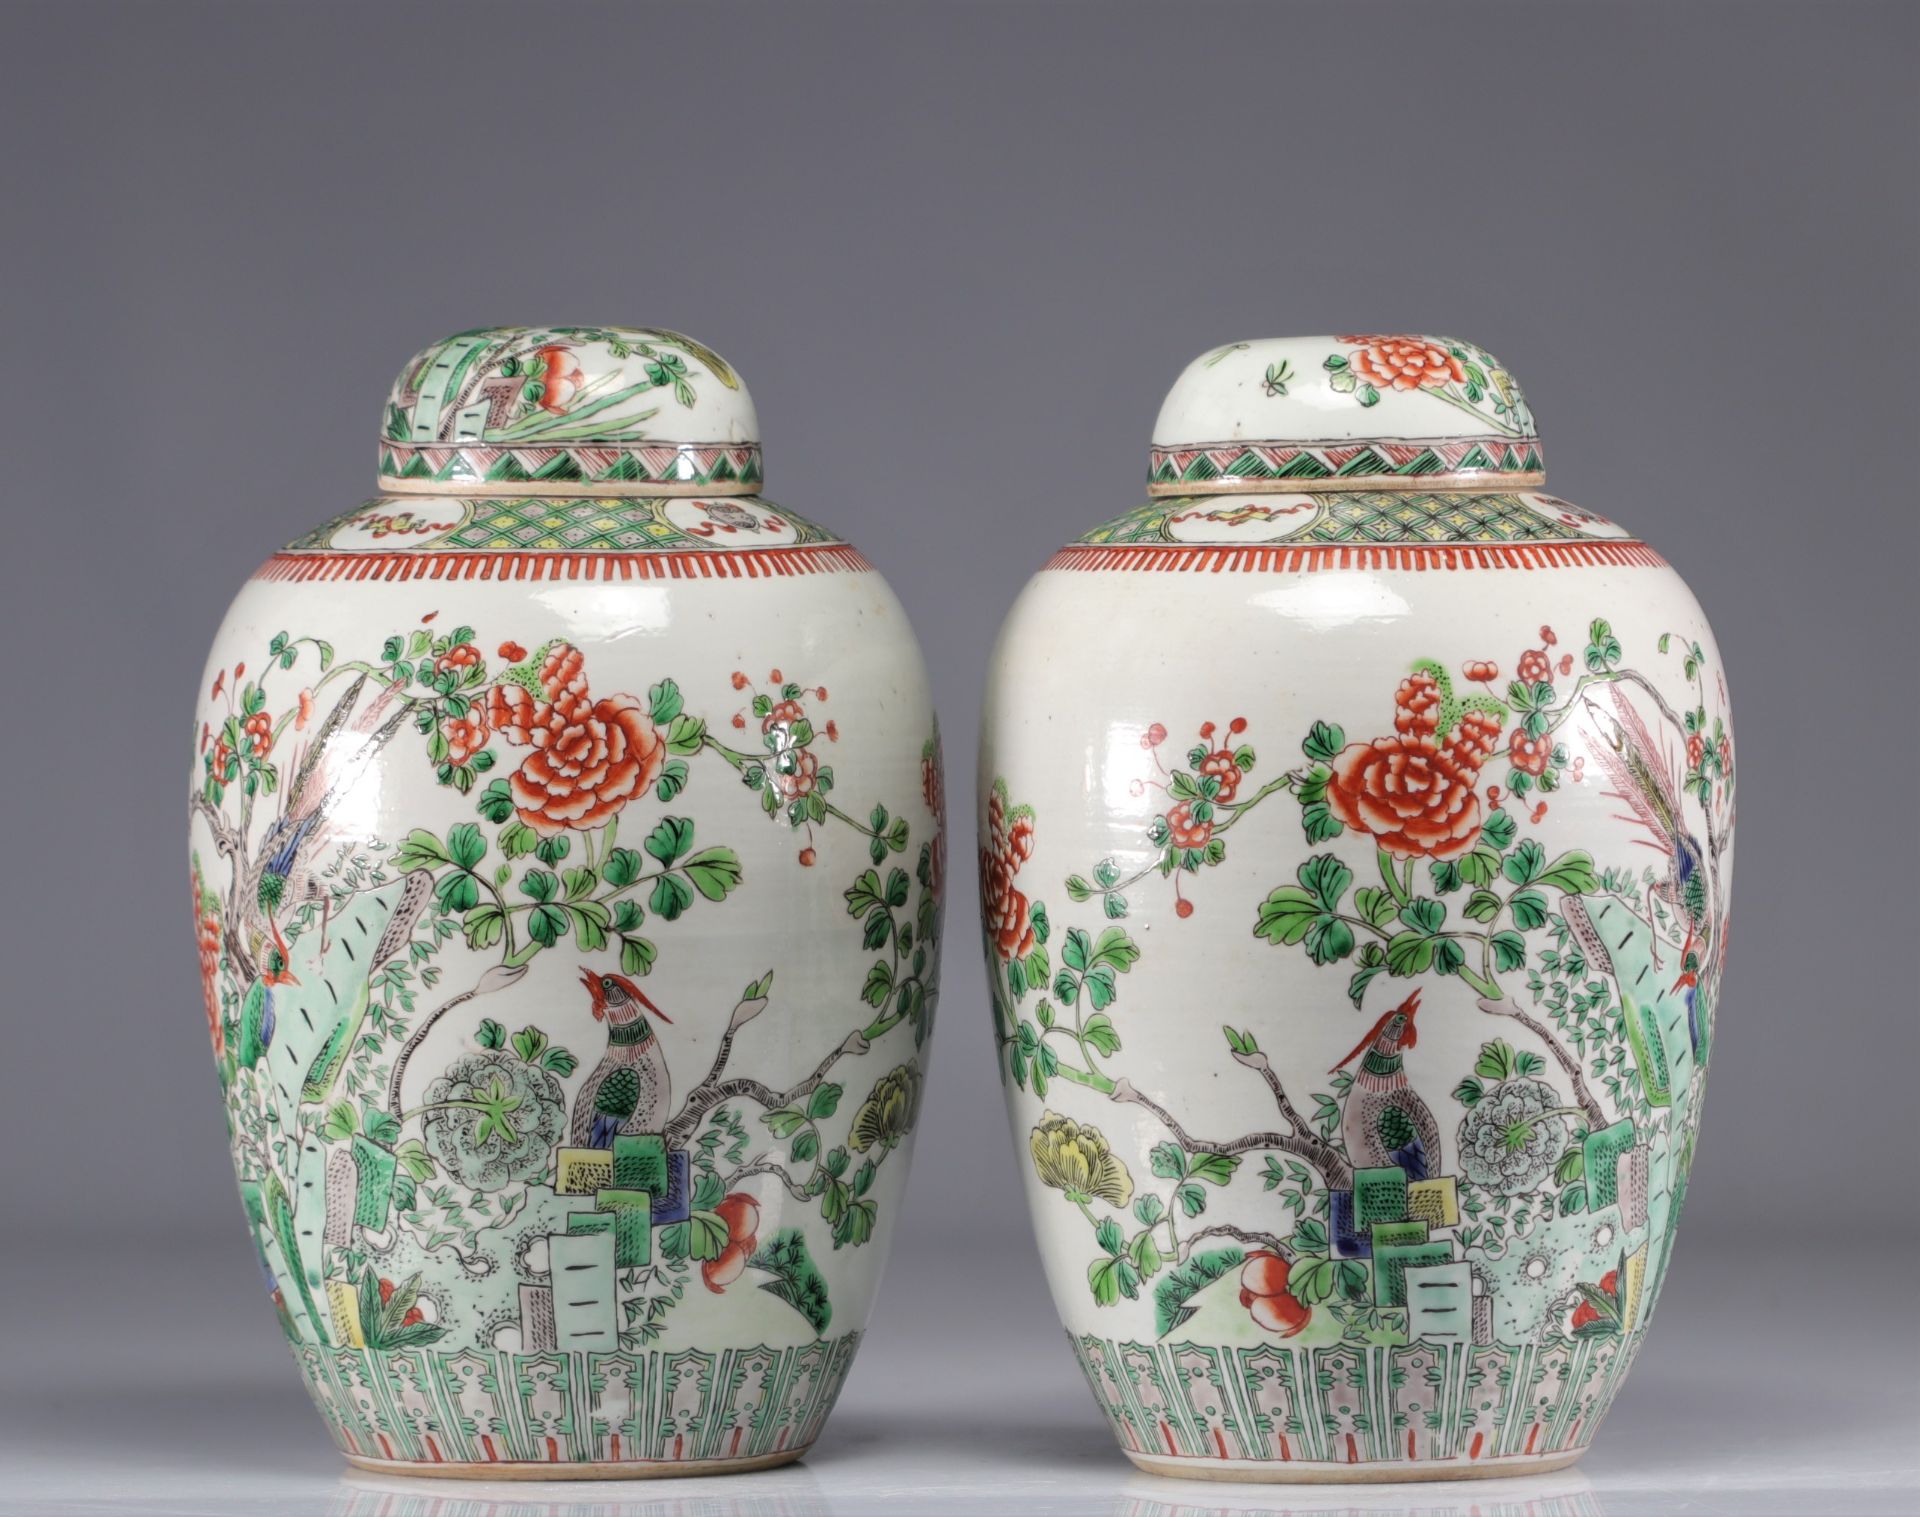 (2) Pair of vases covered with Famille verte and decorated with birds from 19th century - Image 2 of 4